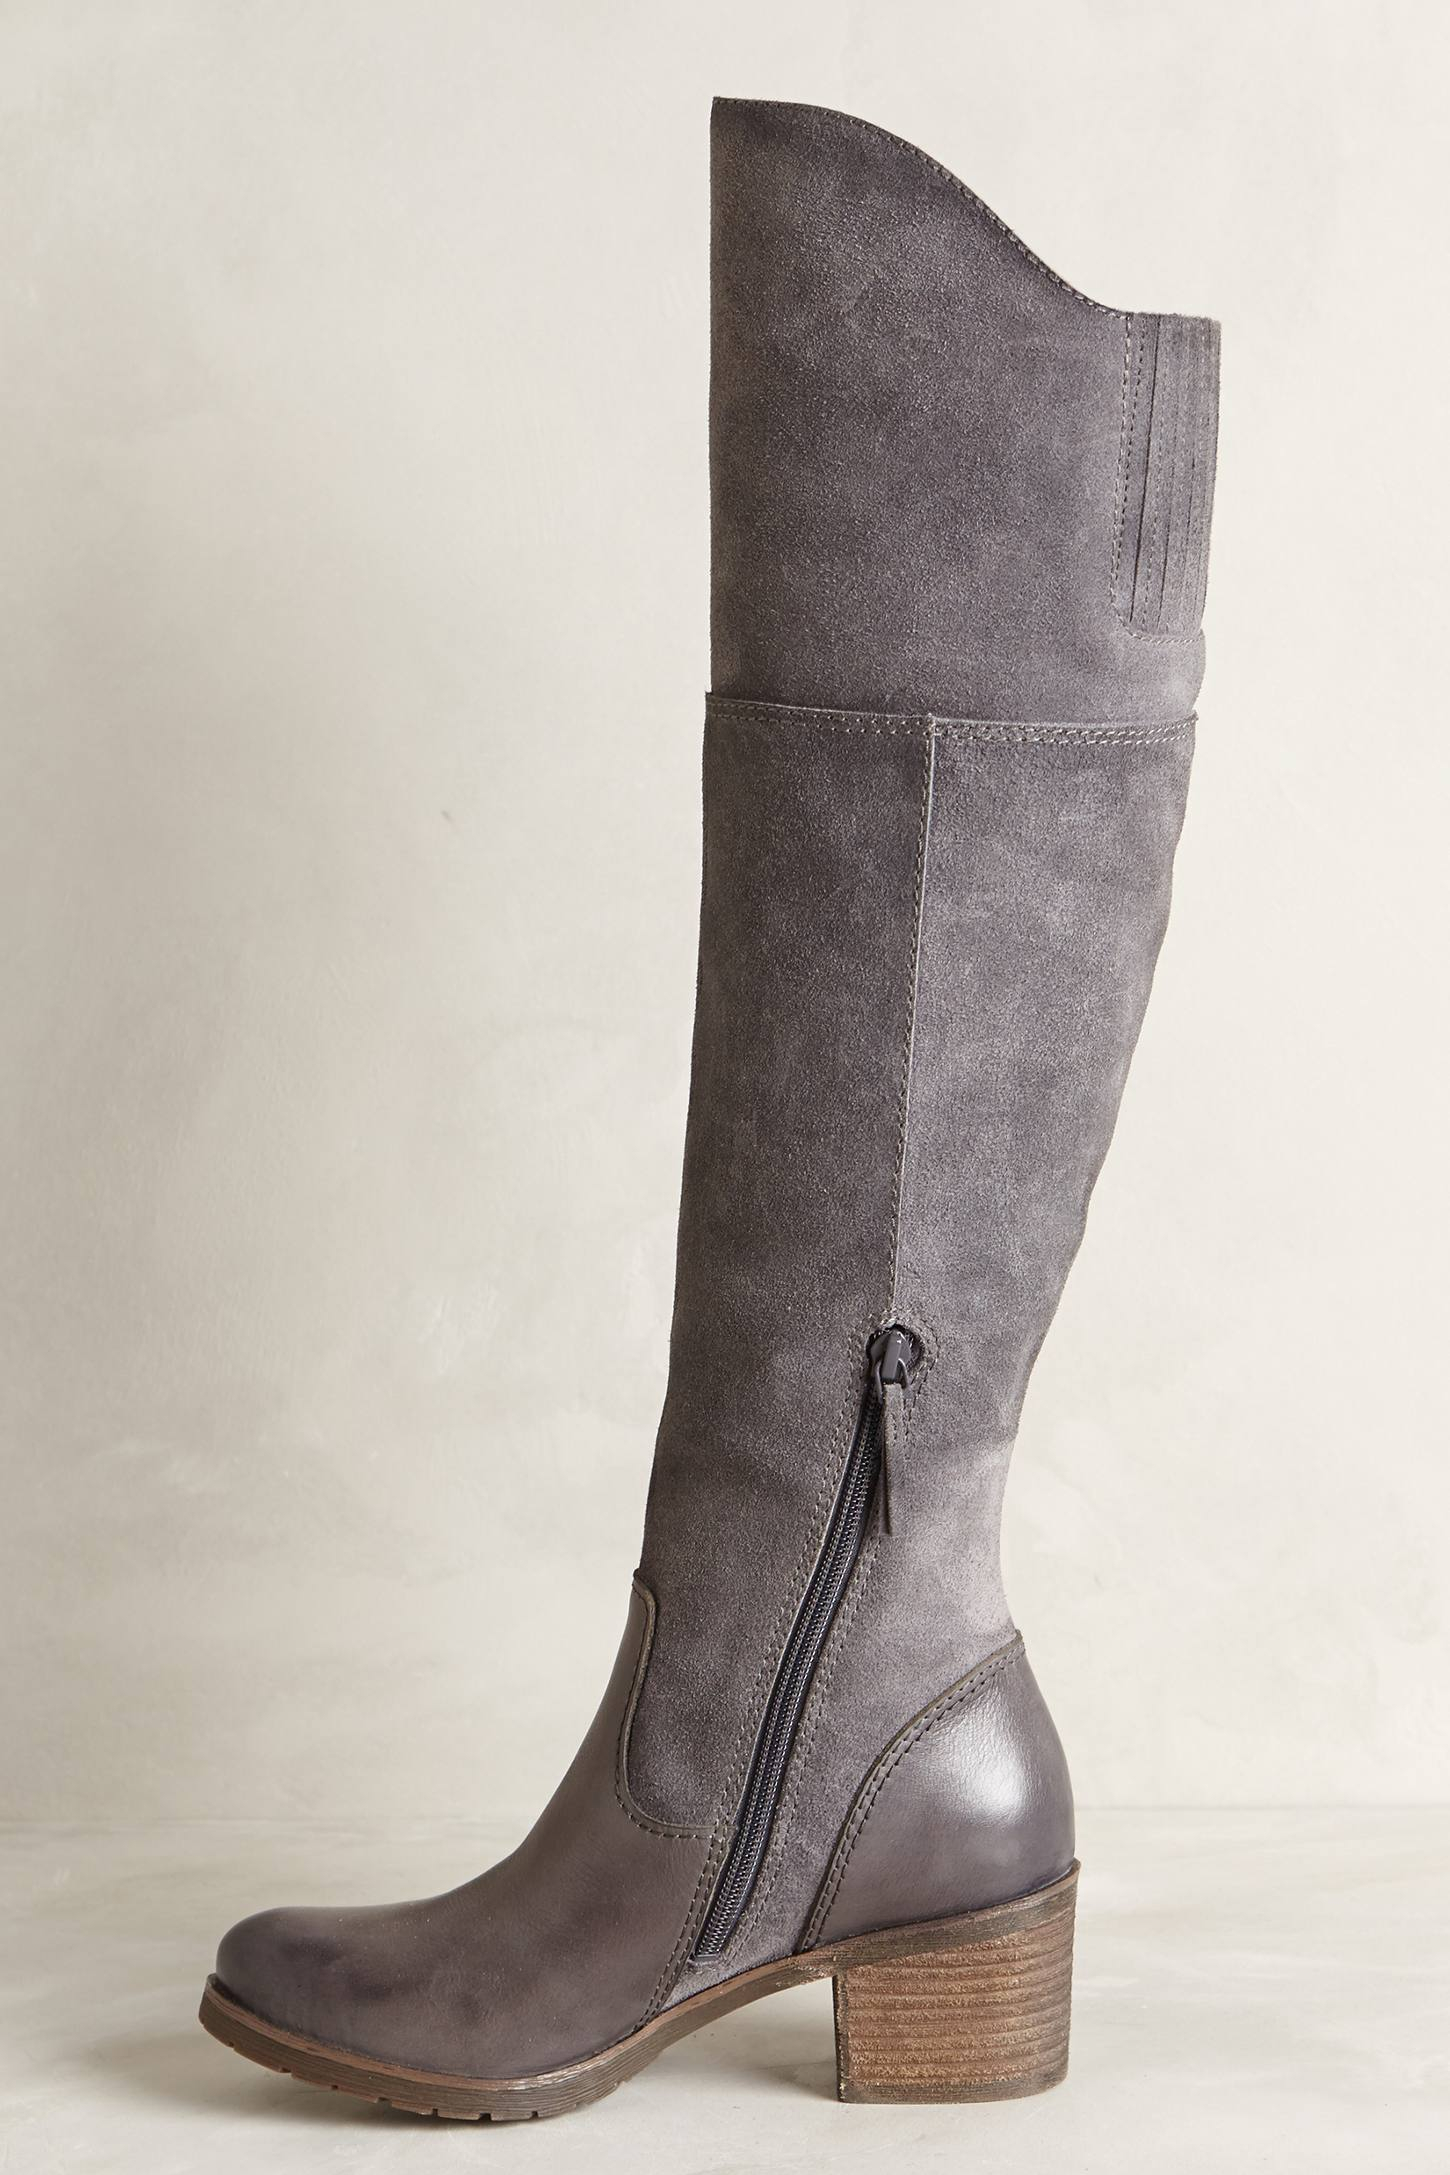 Lyst - Naya Minerve Boots in Gray